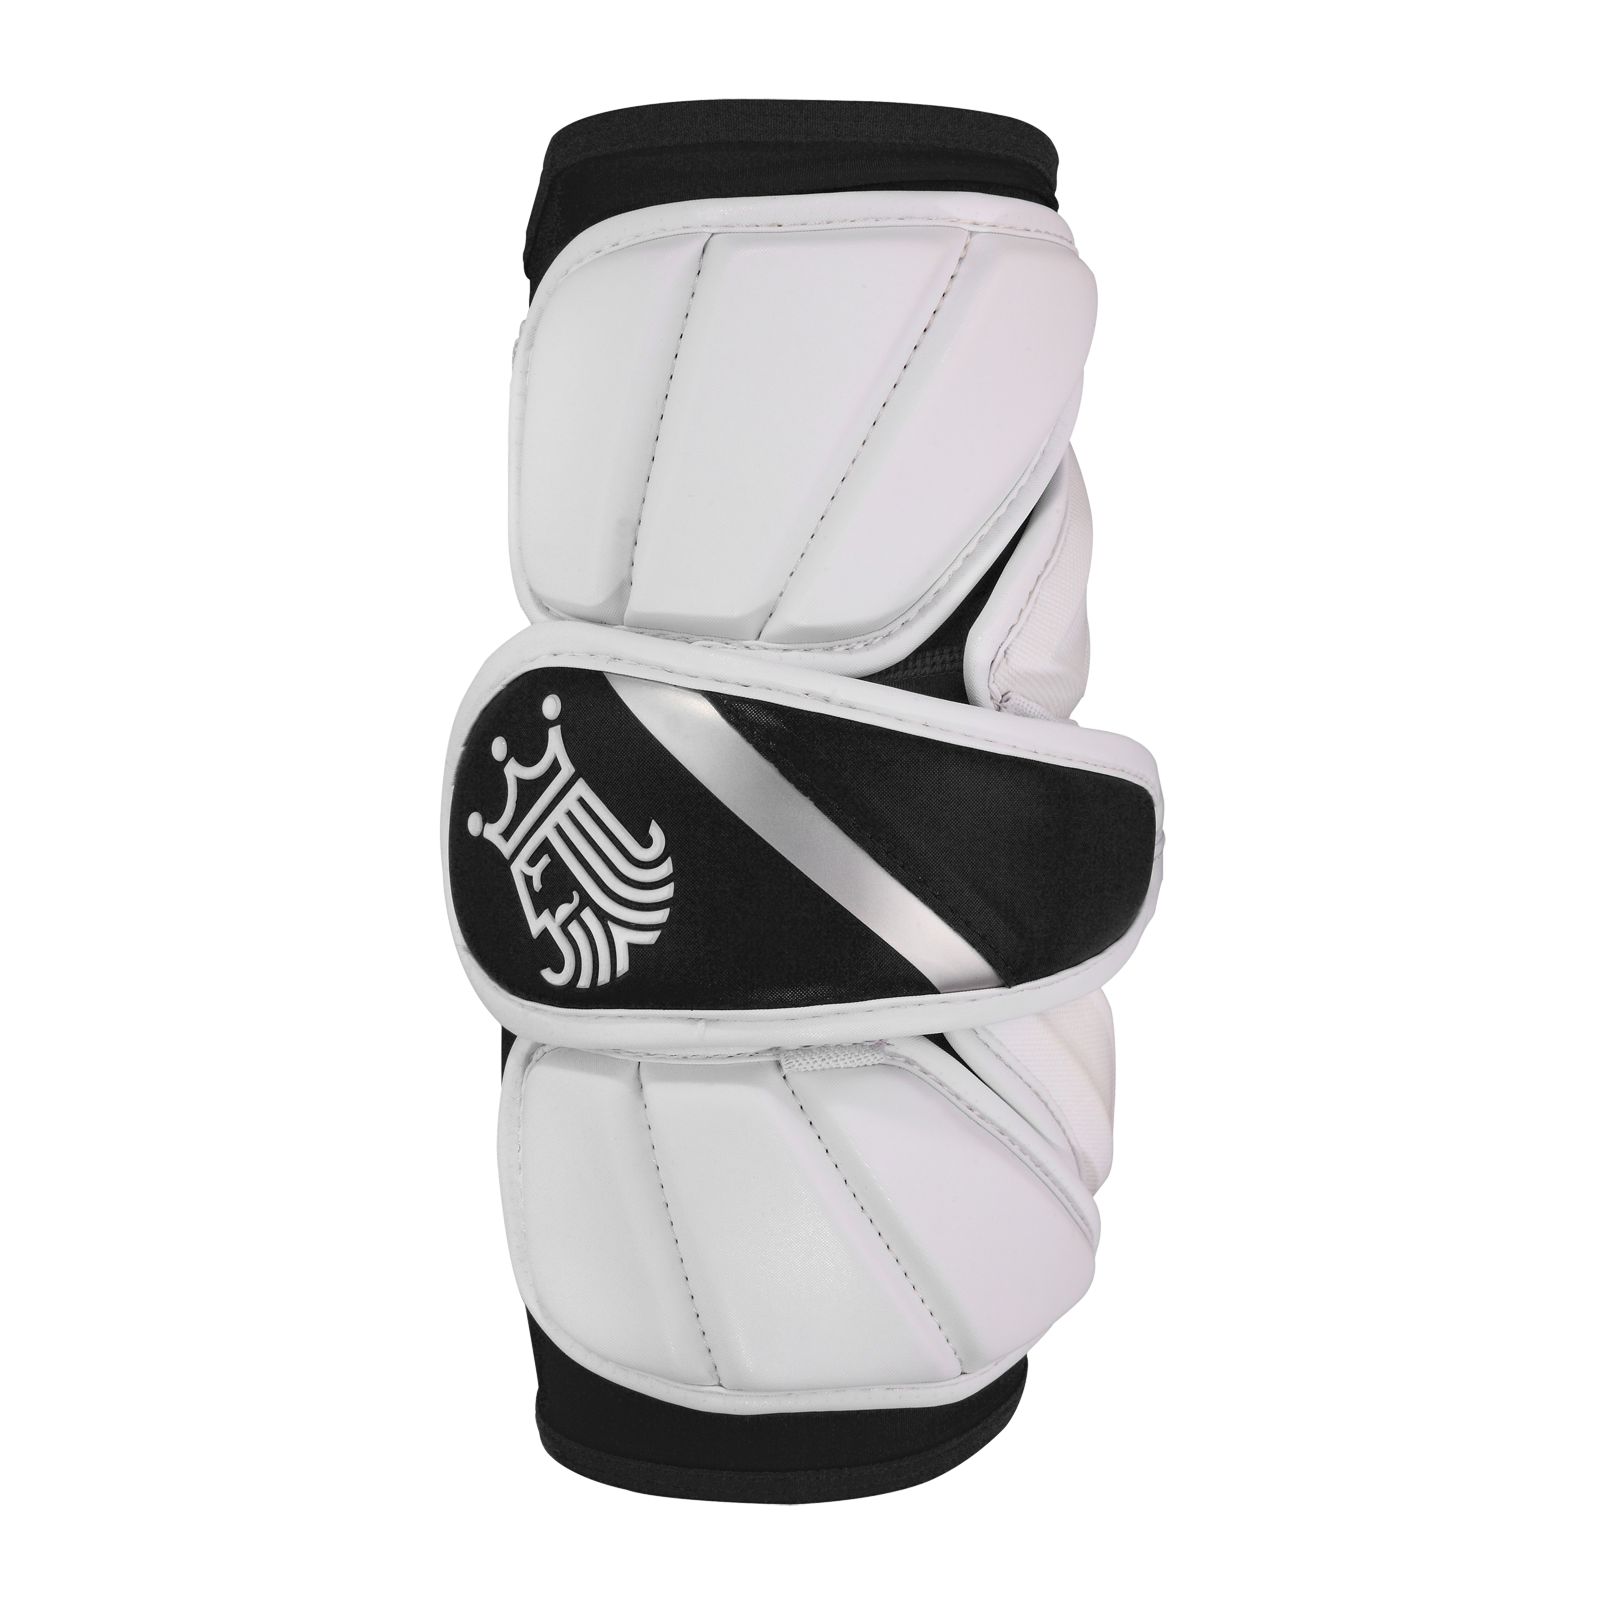 King V Arm Pad, Black with White image number 0